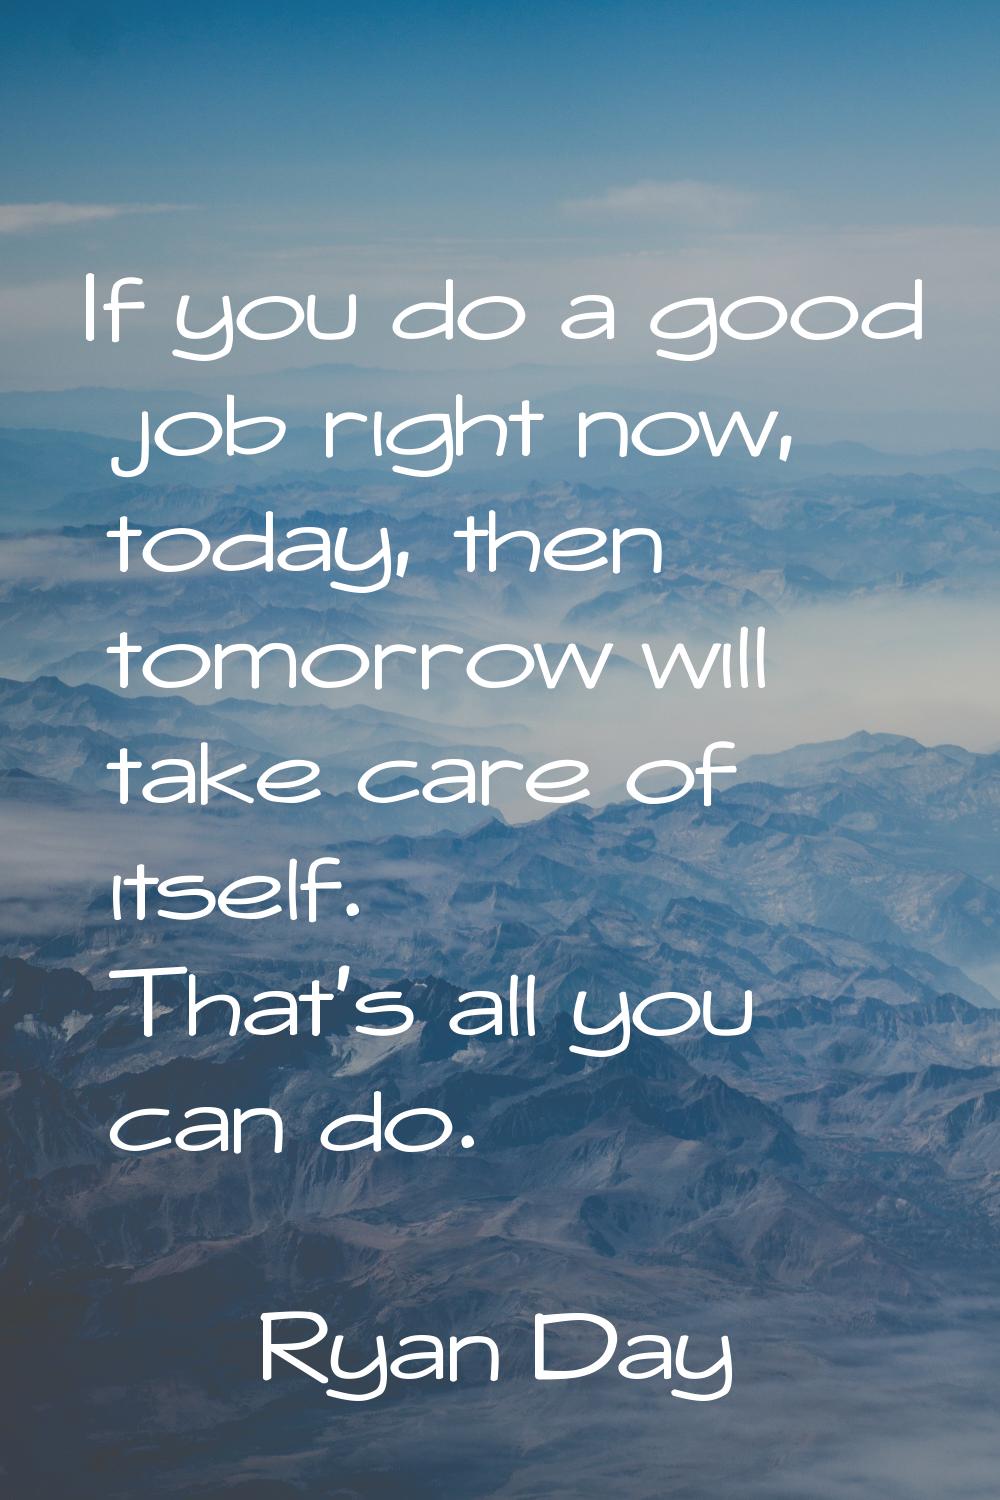 If you do a good job right now, today, then tomorrow will take care of itself. That’s all you can d